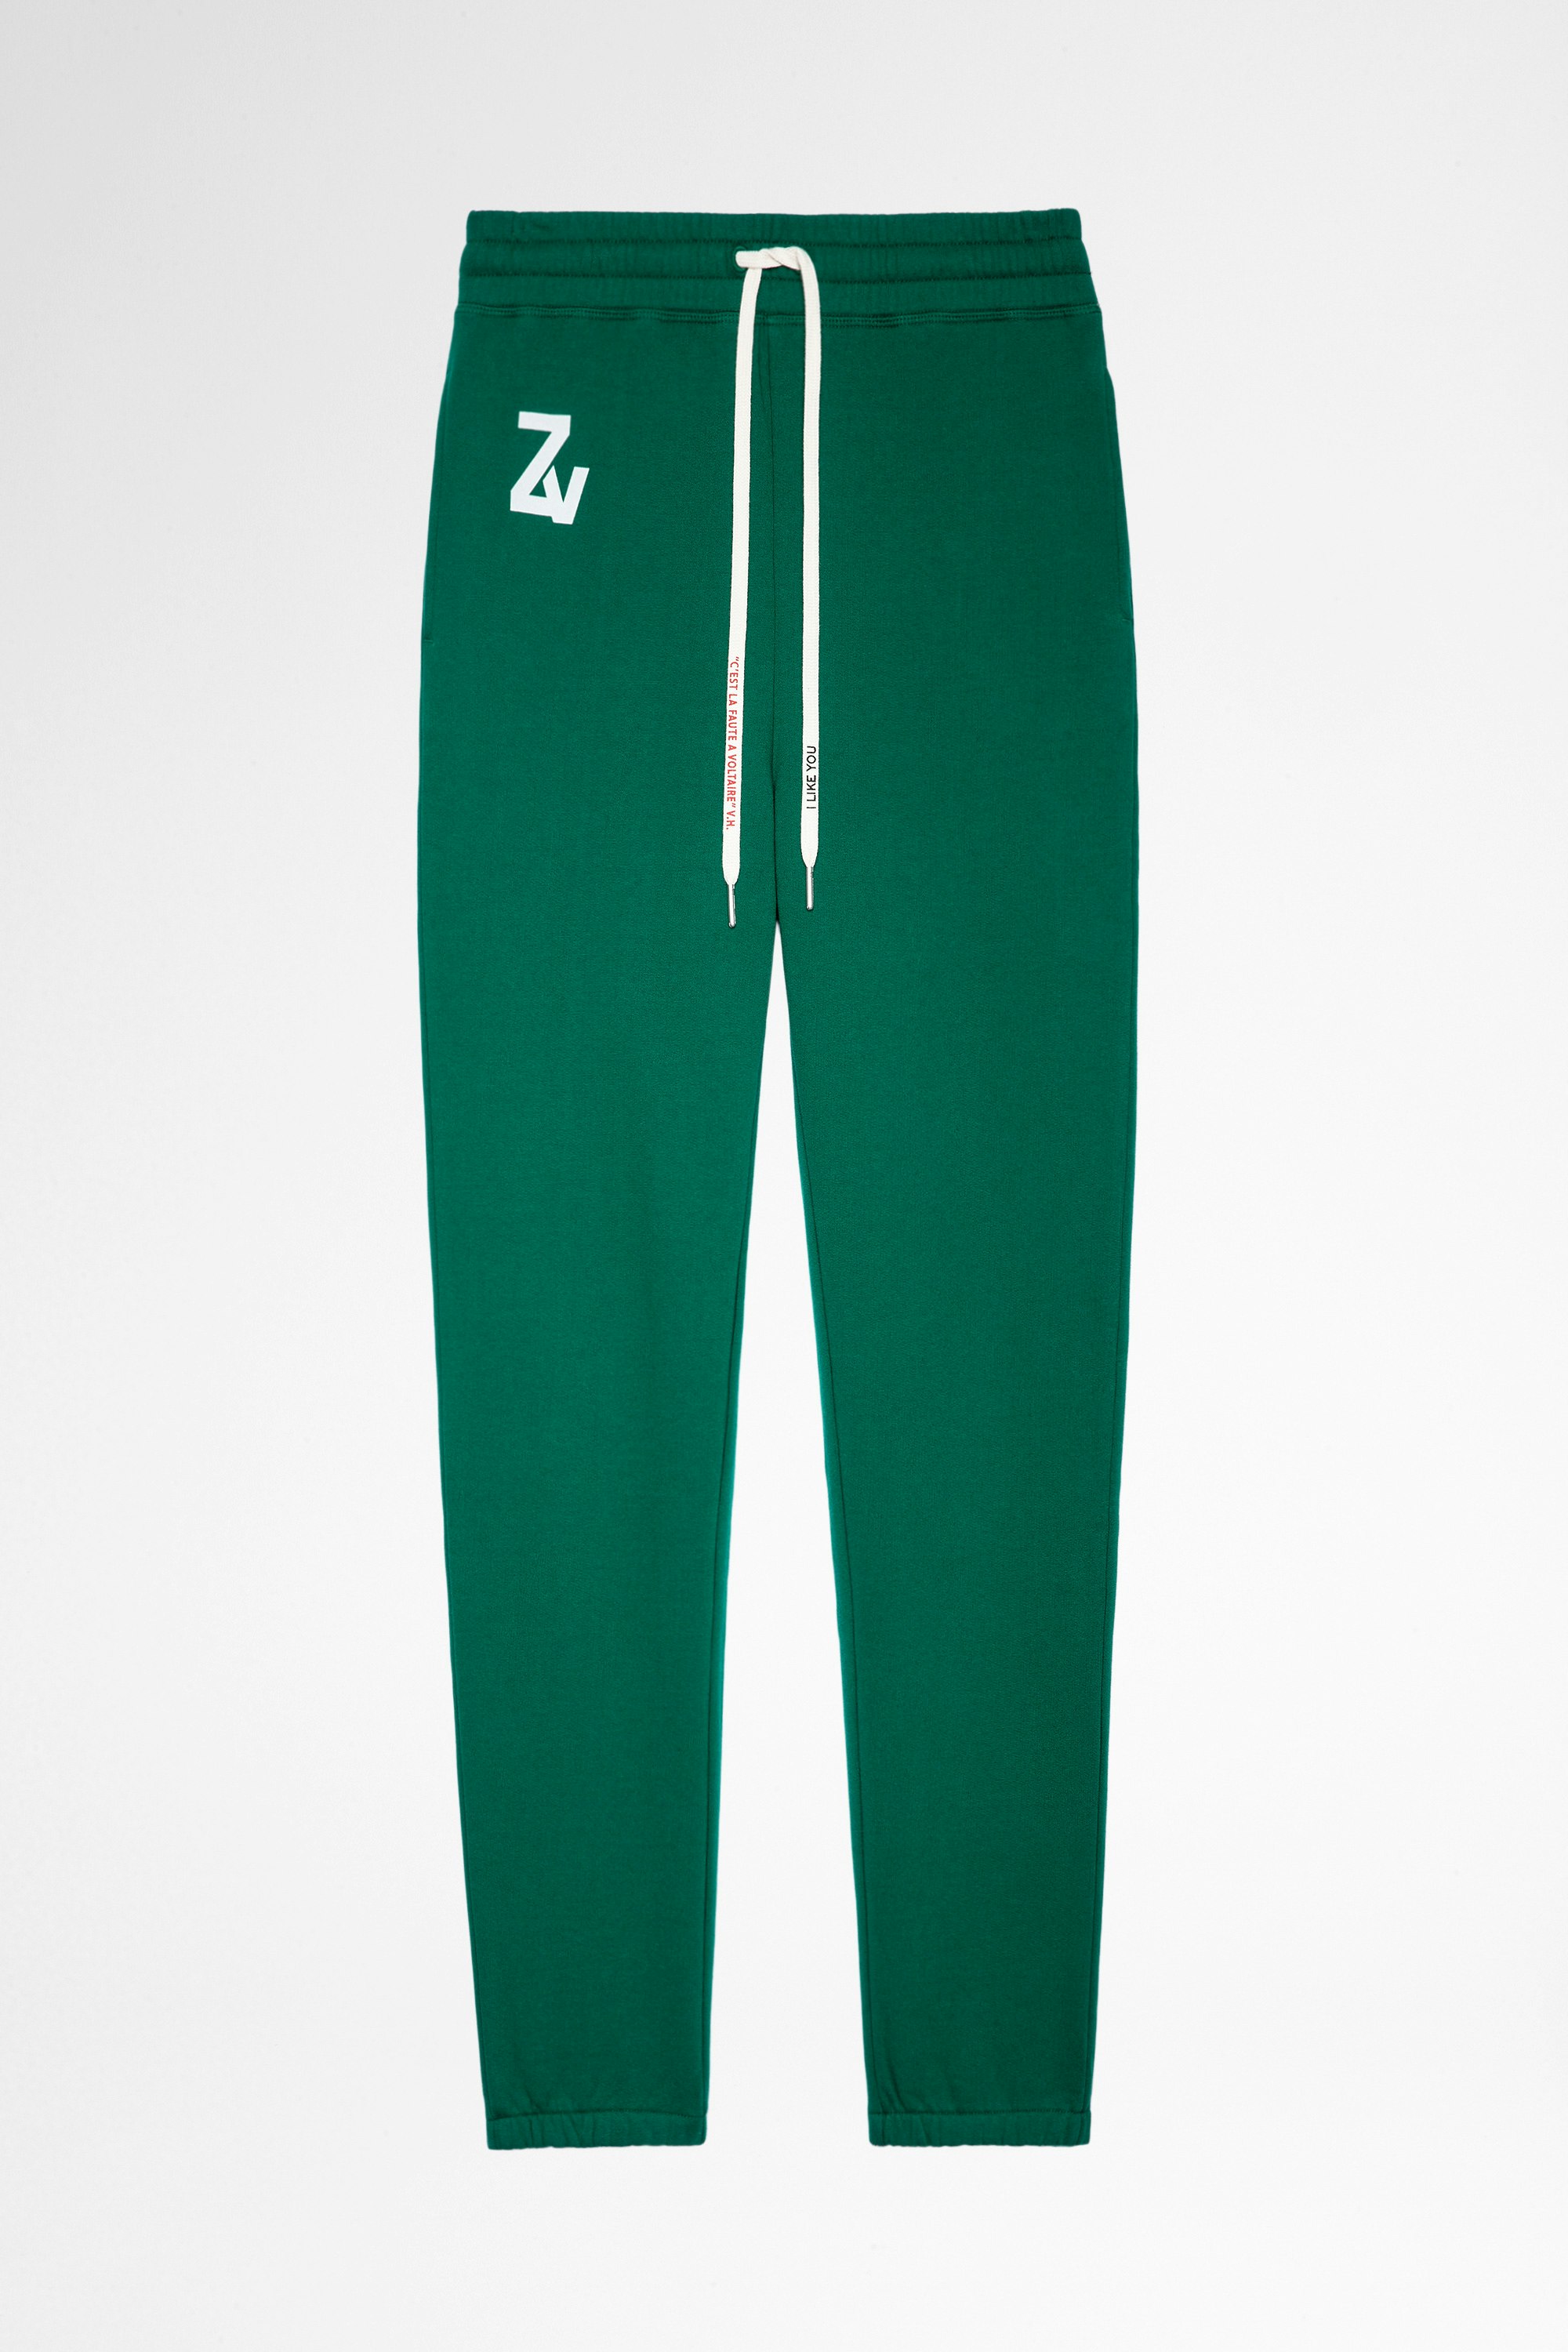 Steevy Sweat パンツ Women's green cotton sweatpants. This product is GOTS certified and made with fibers from organic farming.